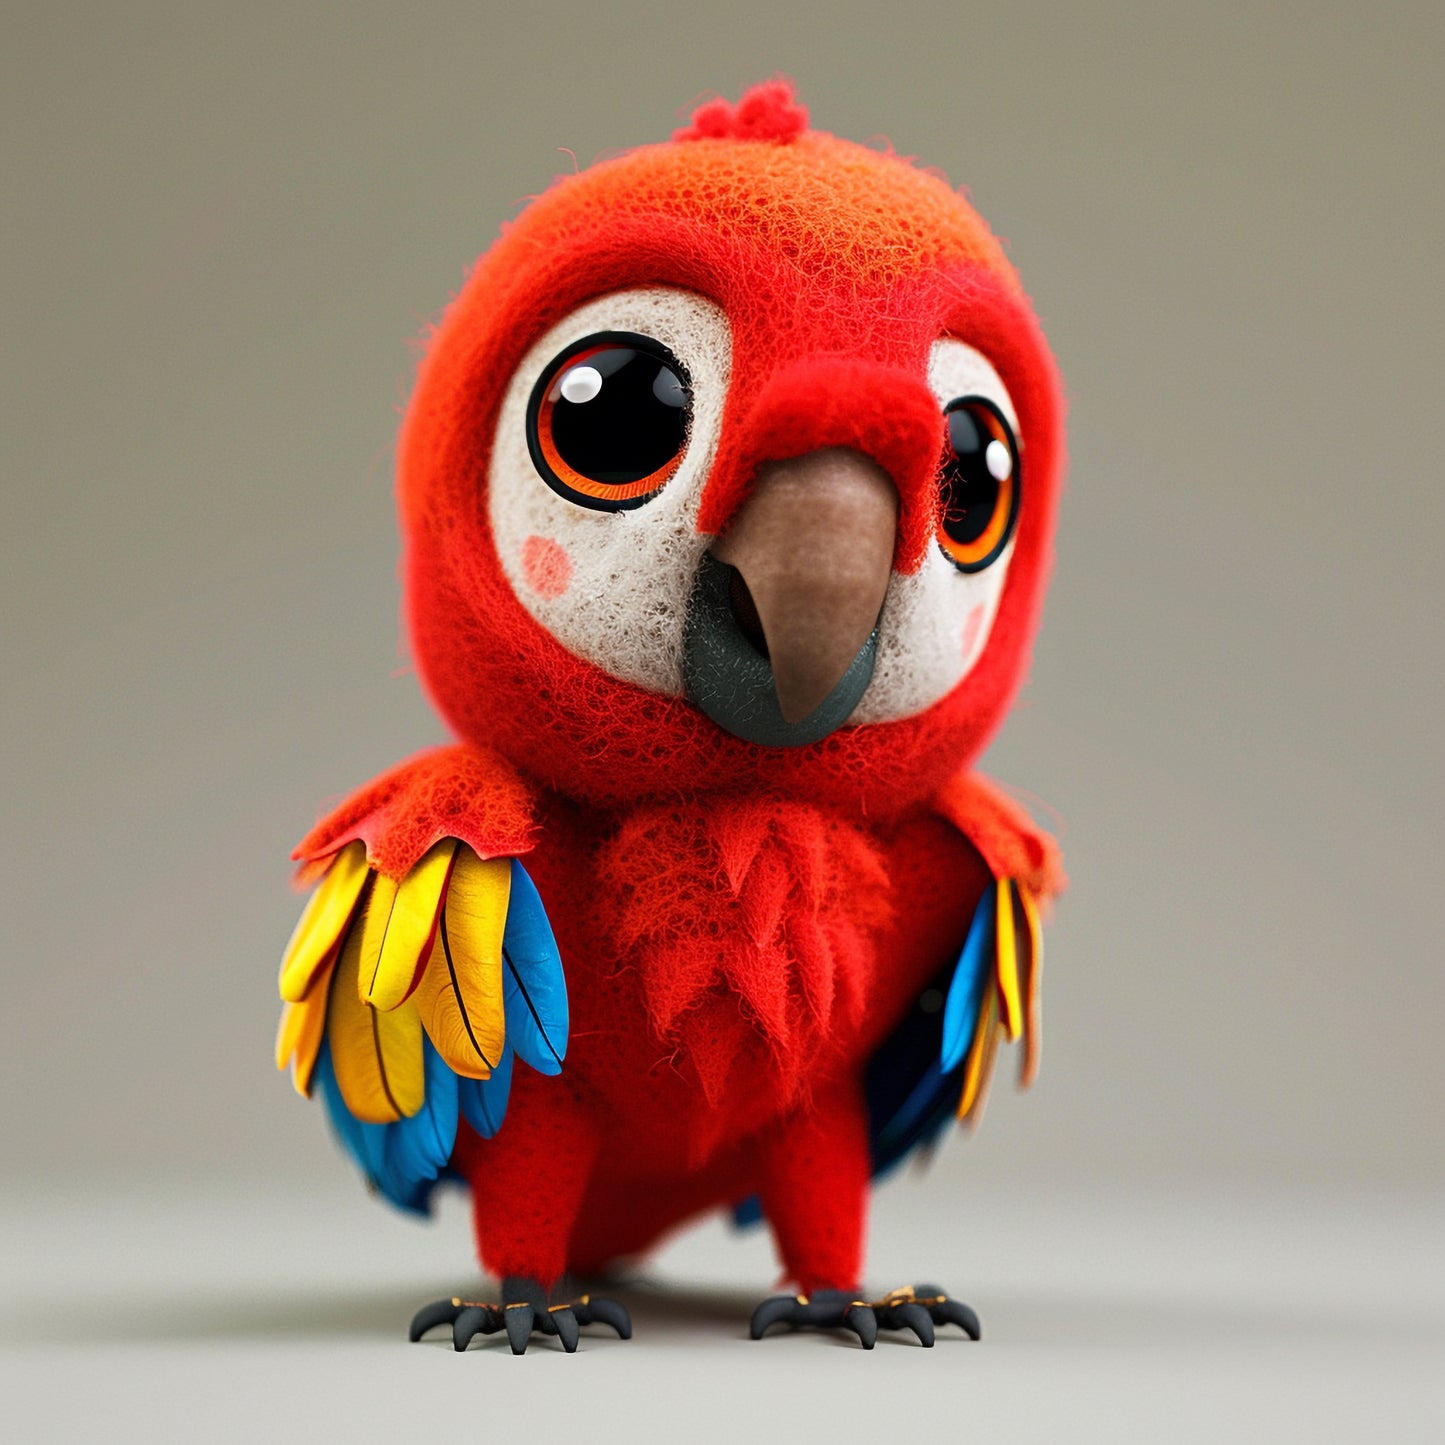 Adorable Scarlet Macaw Plush Toy Standing Alone